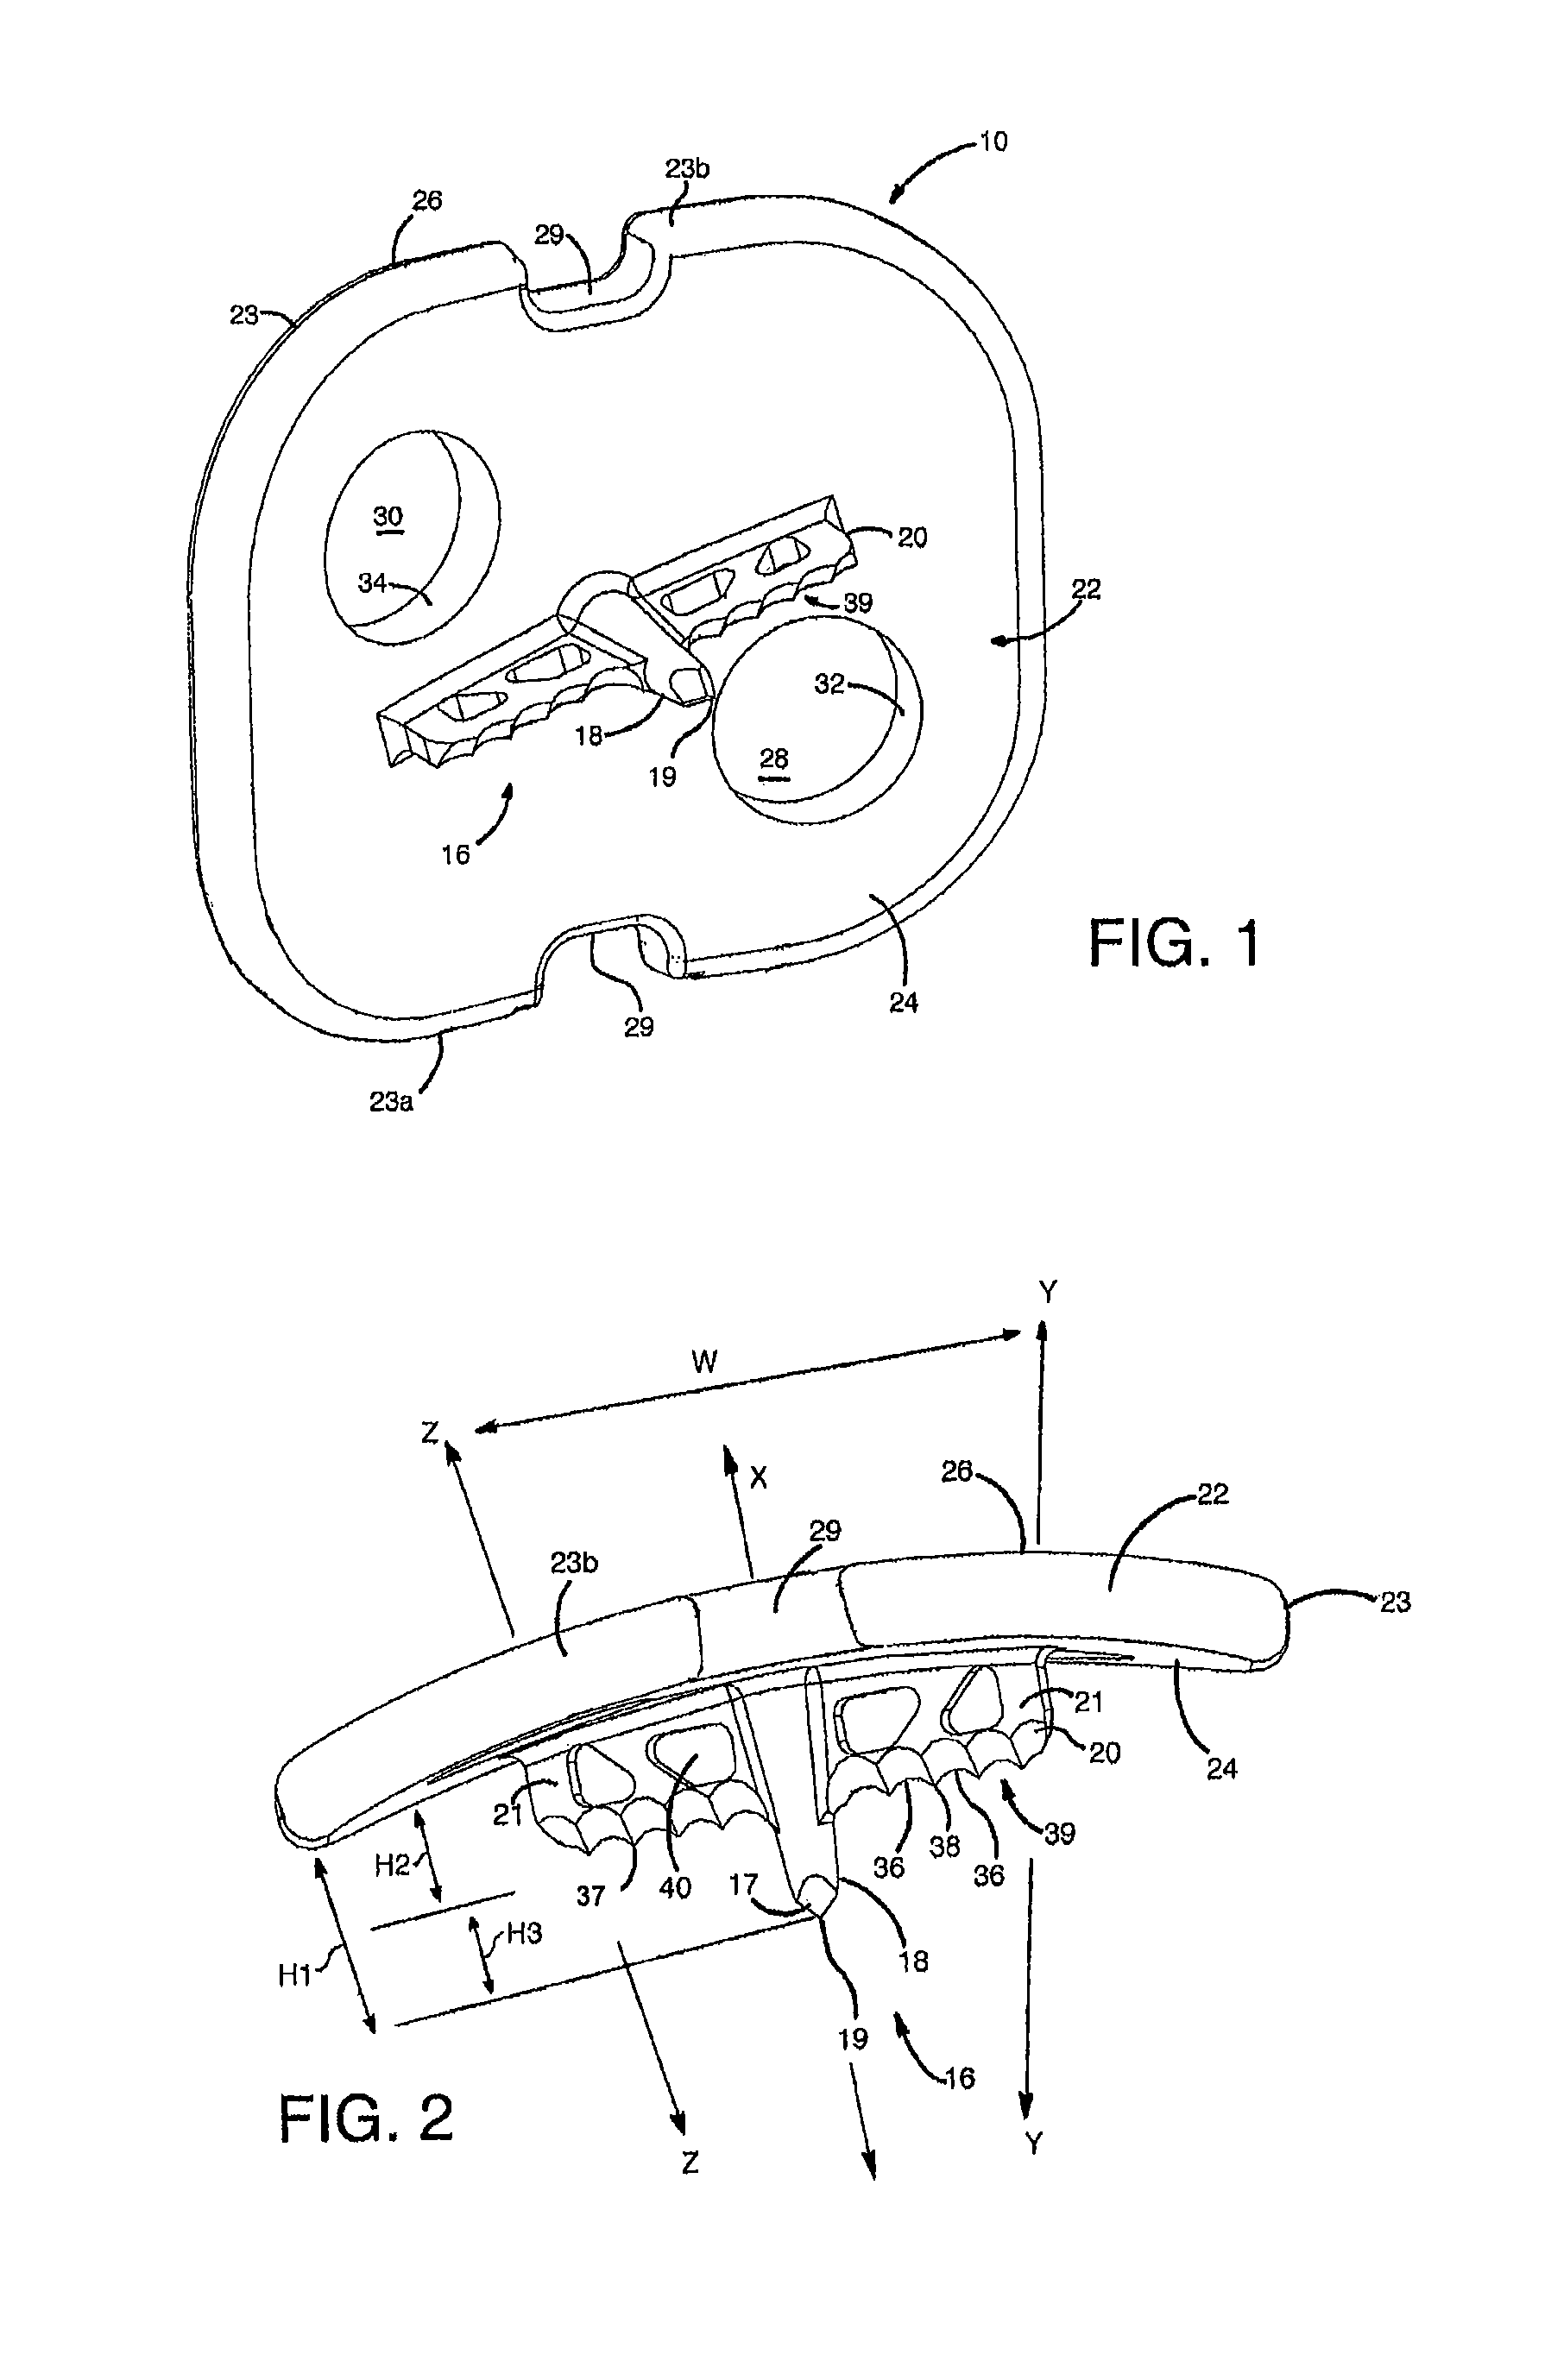 Mounting devices for fixation devices and insertion instruments used therewith